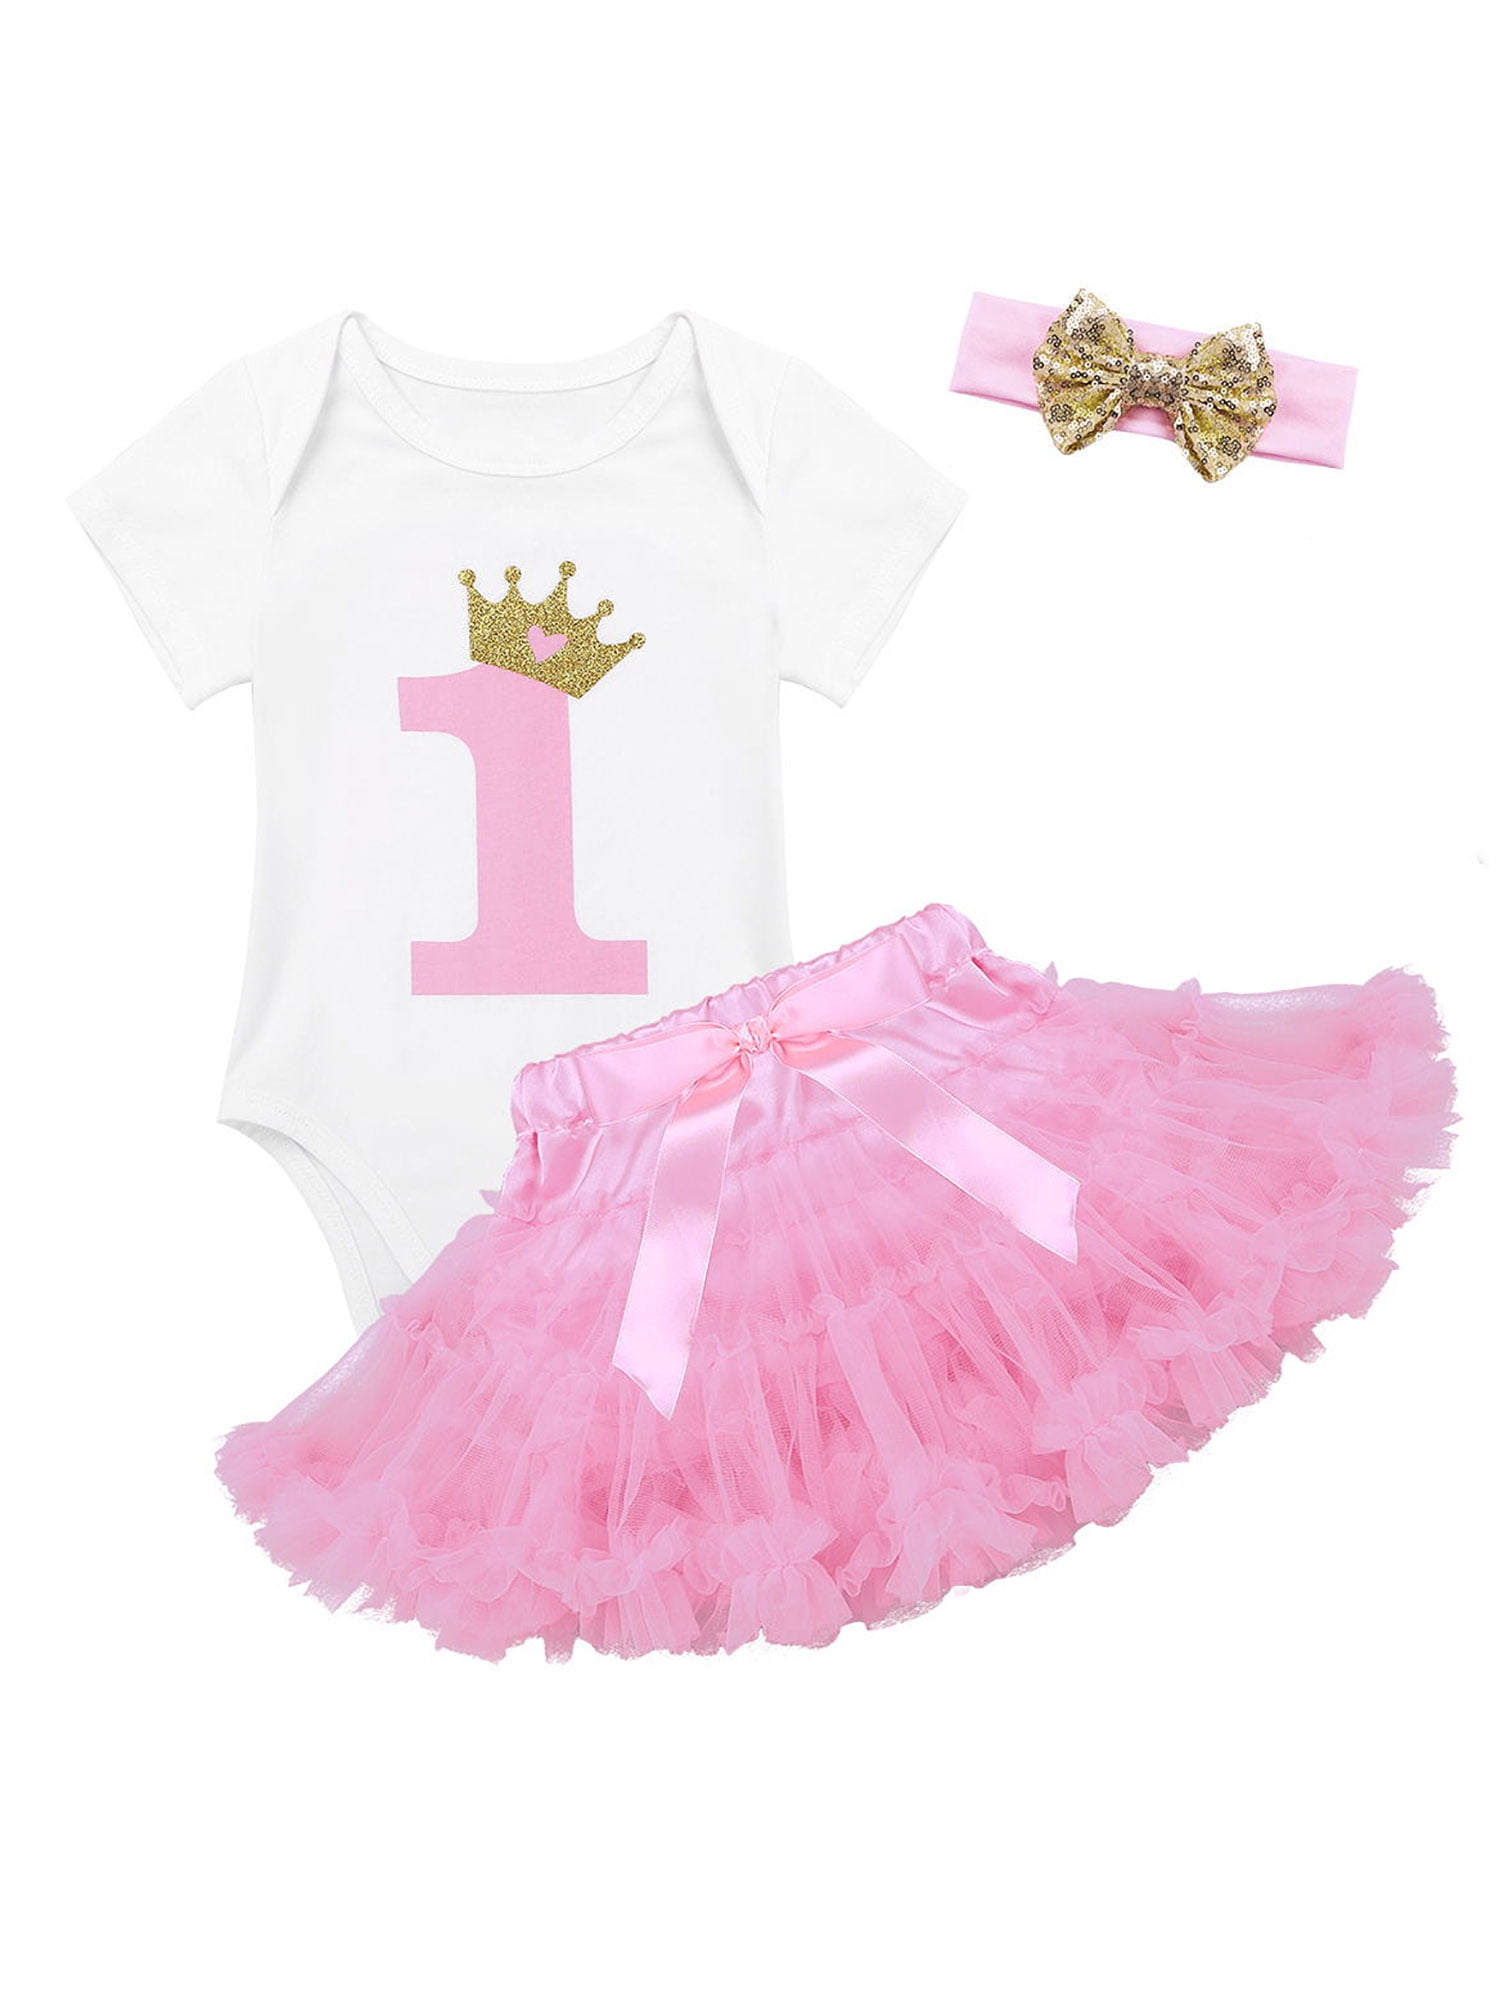 Details about   Rhinestone Hot Pink Crown Newborn Baby White Top Pink Floral Rose Skirt 3-12M